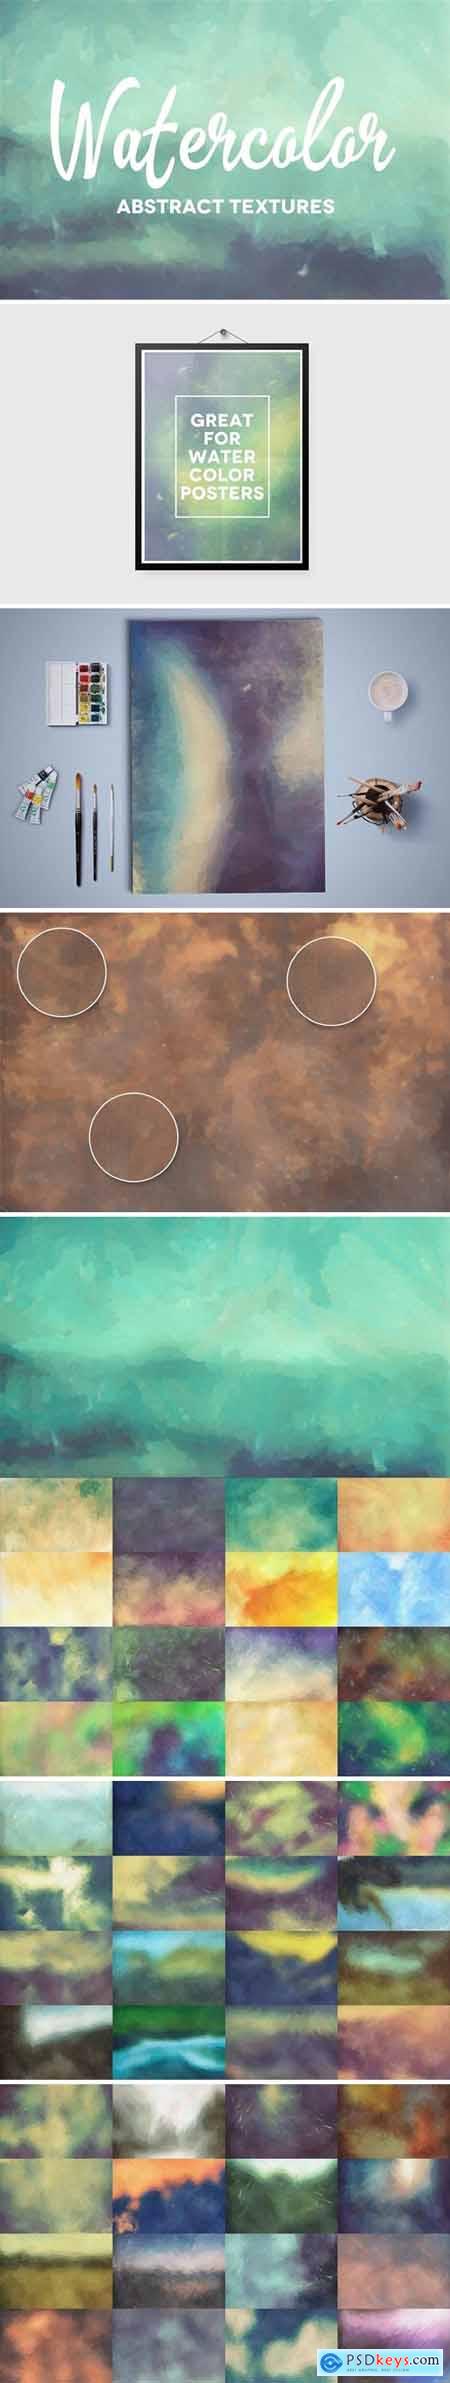 50 Abstract Watercolor Textures